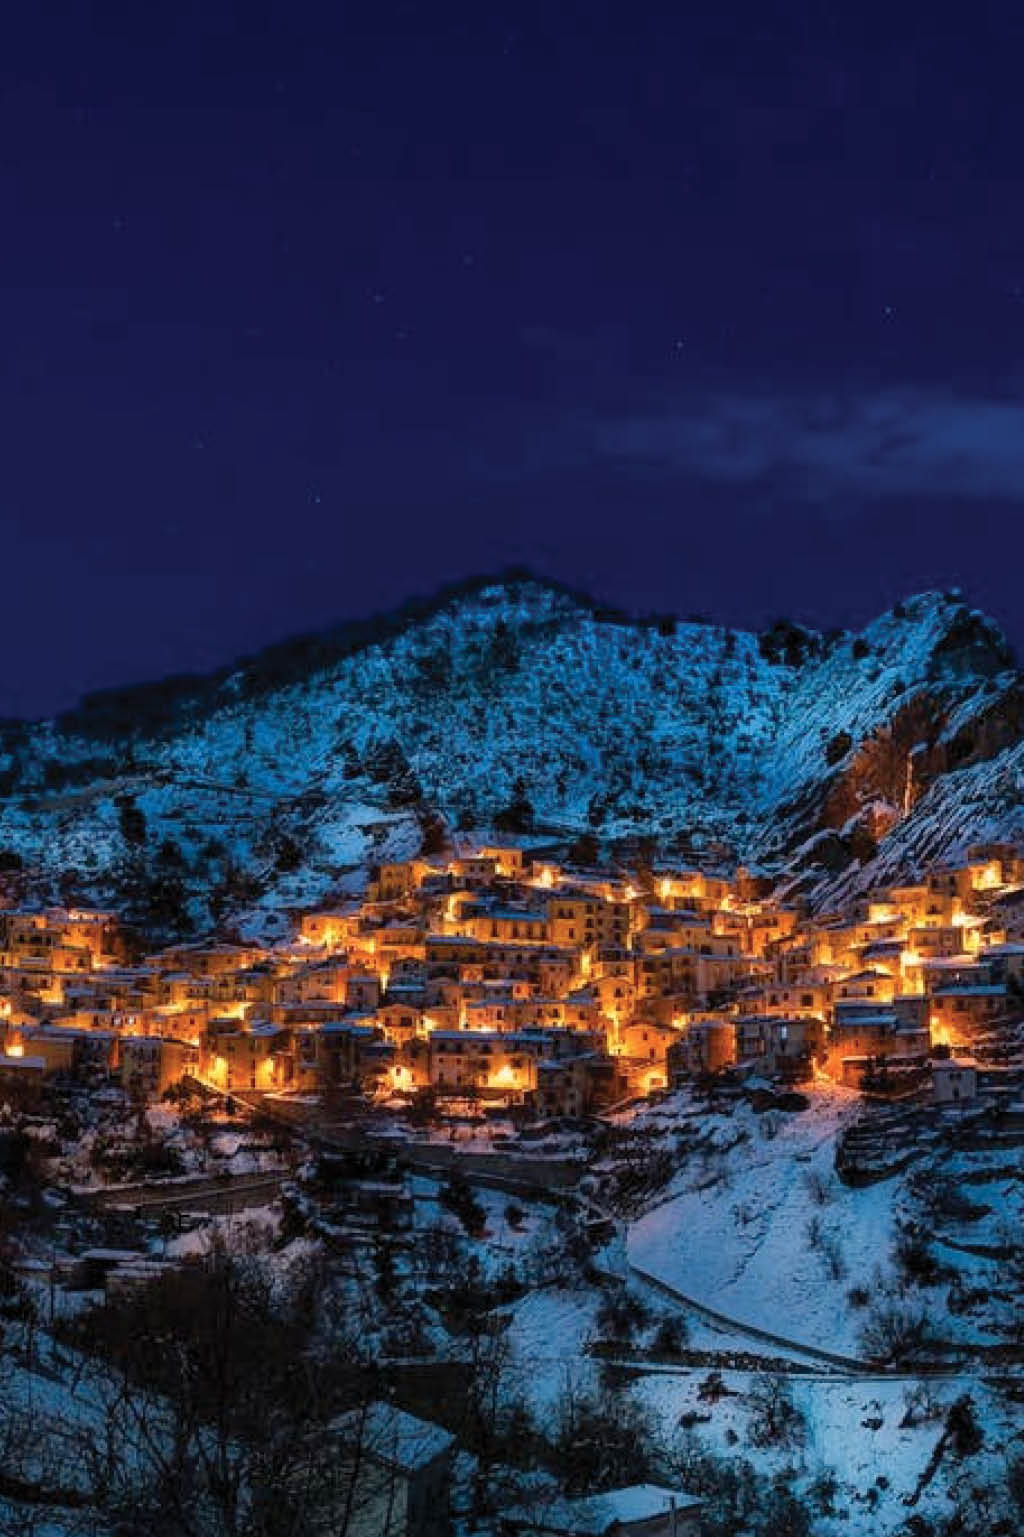 town nestled along a snowy mountainside